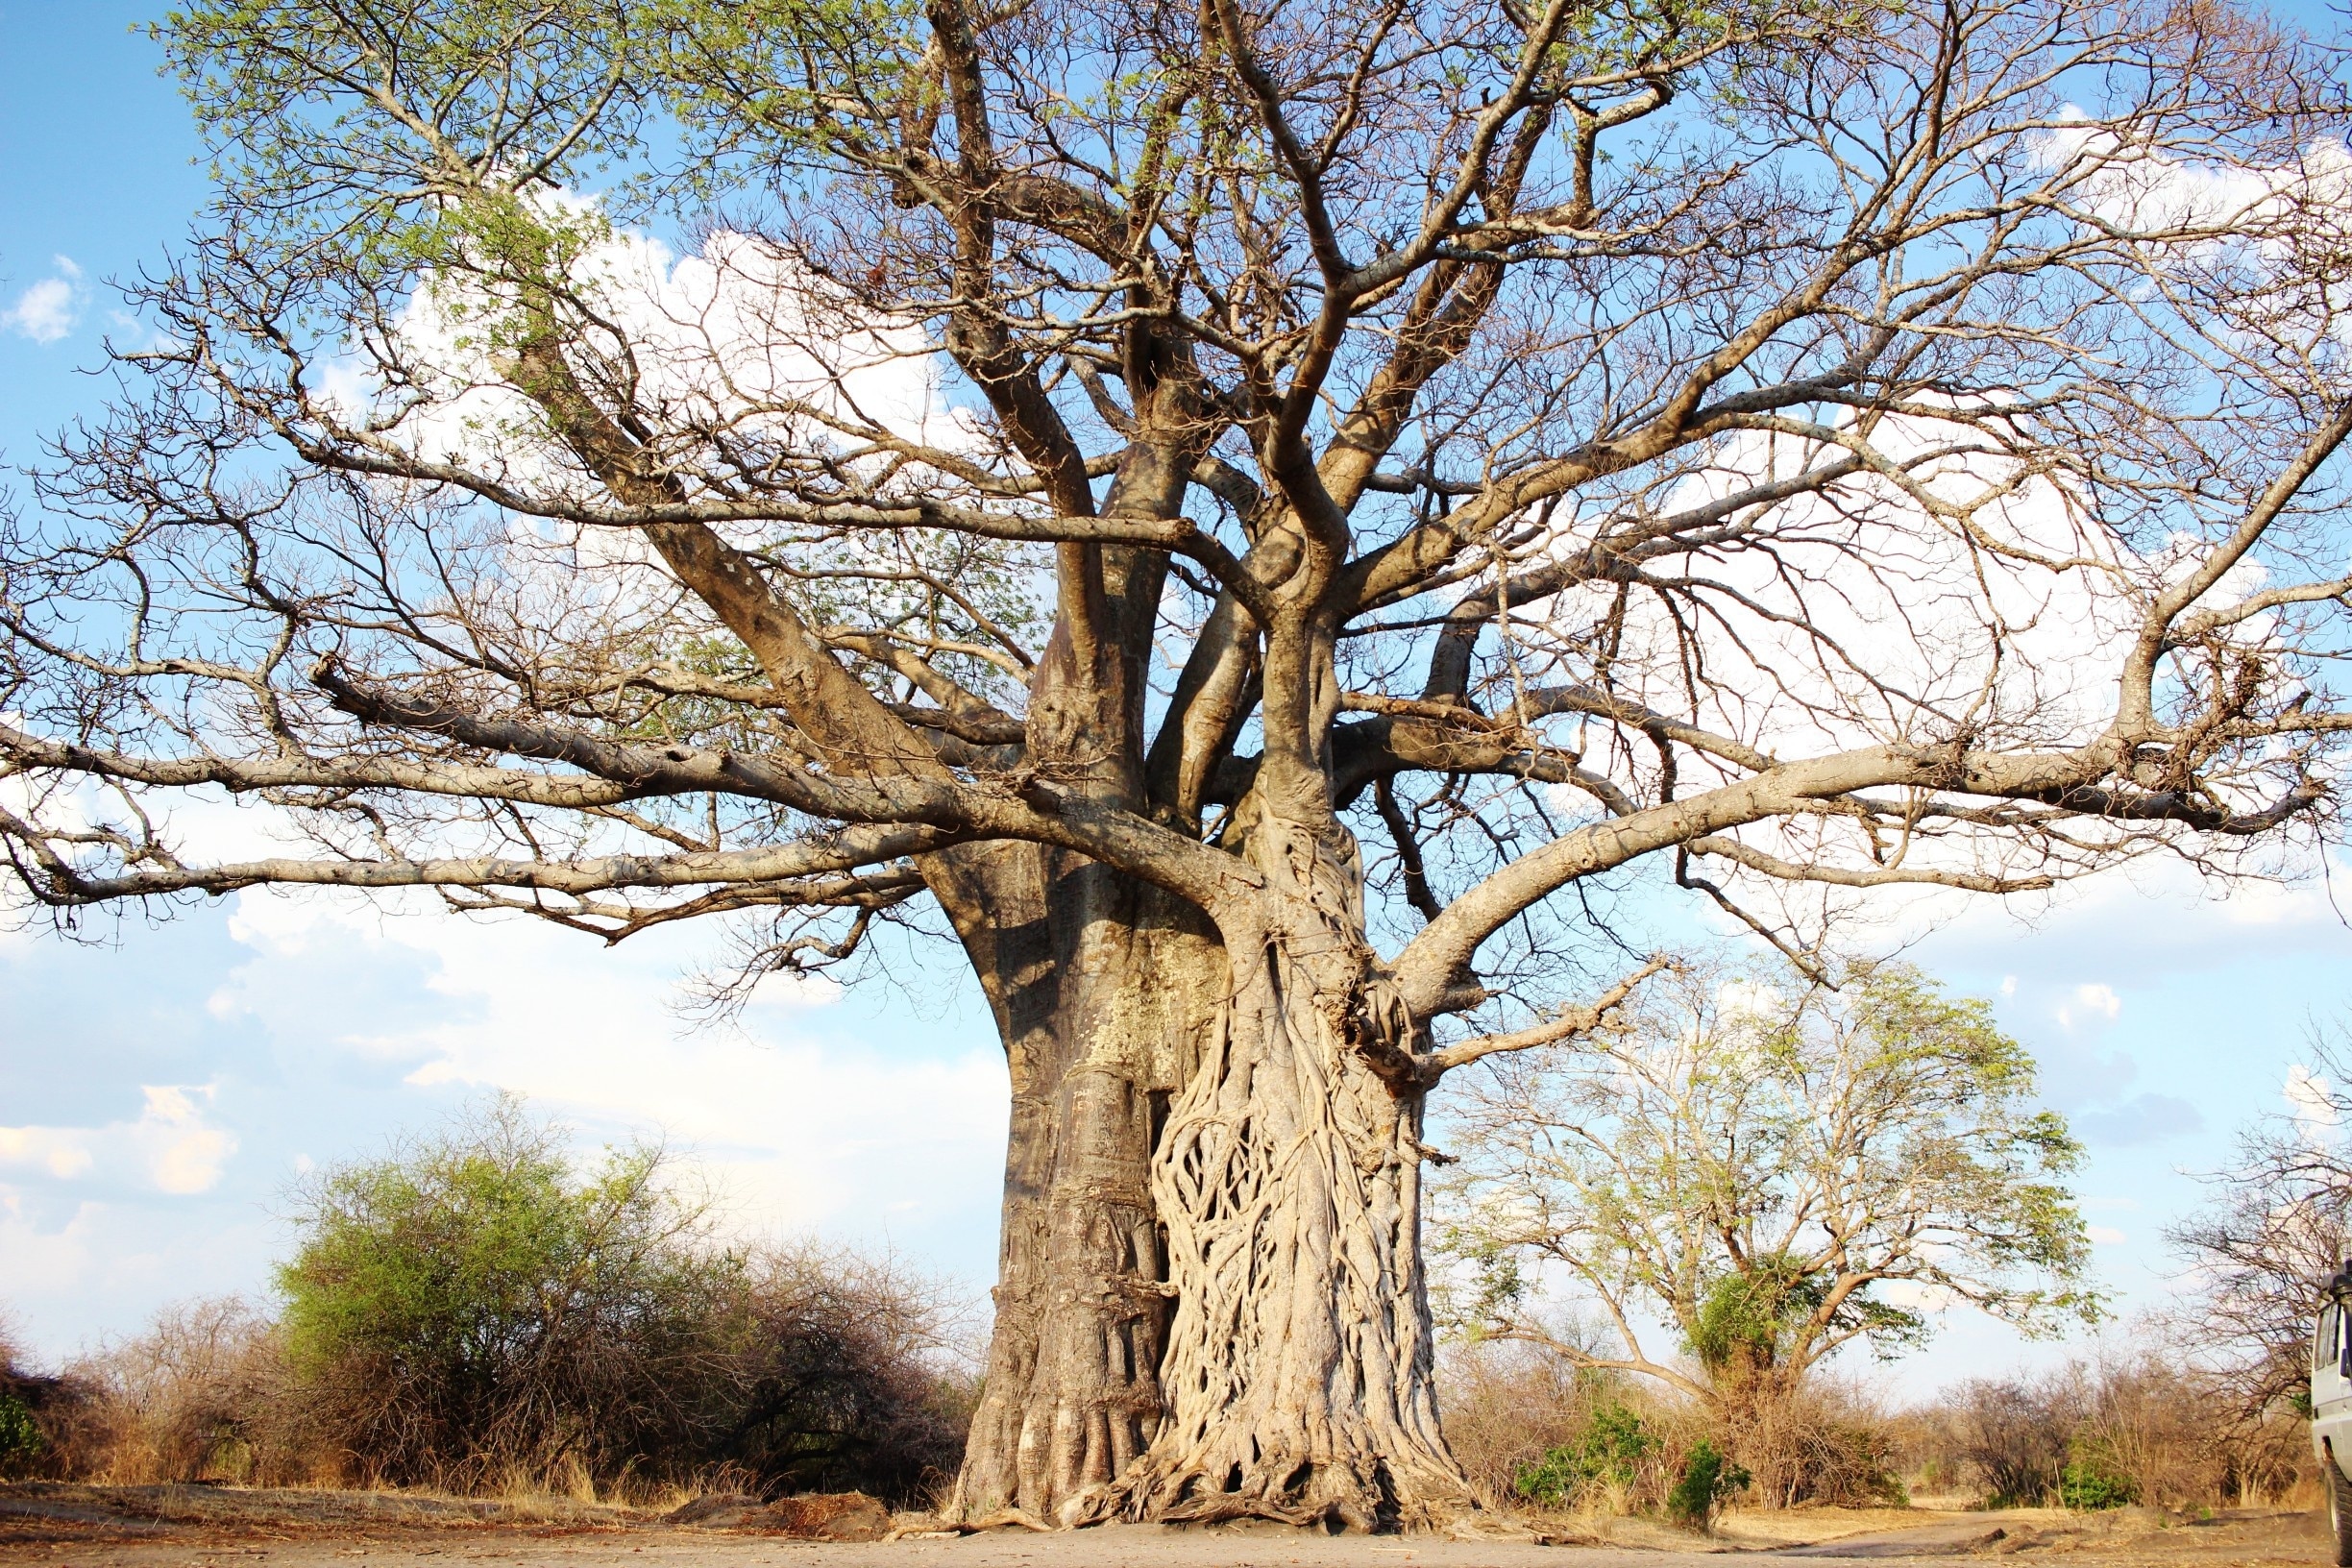 While visiting the park, ask your guide (or drive yourself if you're doing it independently) to head to Livingstone's Baobab. At the northern end of the navigable section of the park, this is the very tree Dr. Livingstone camped under during his exploration of the African continent. The tree is so old it has hollowed out, so you can step inside and look up at the sky through the trunk!